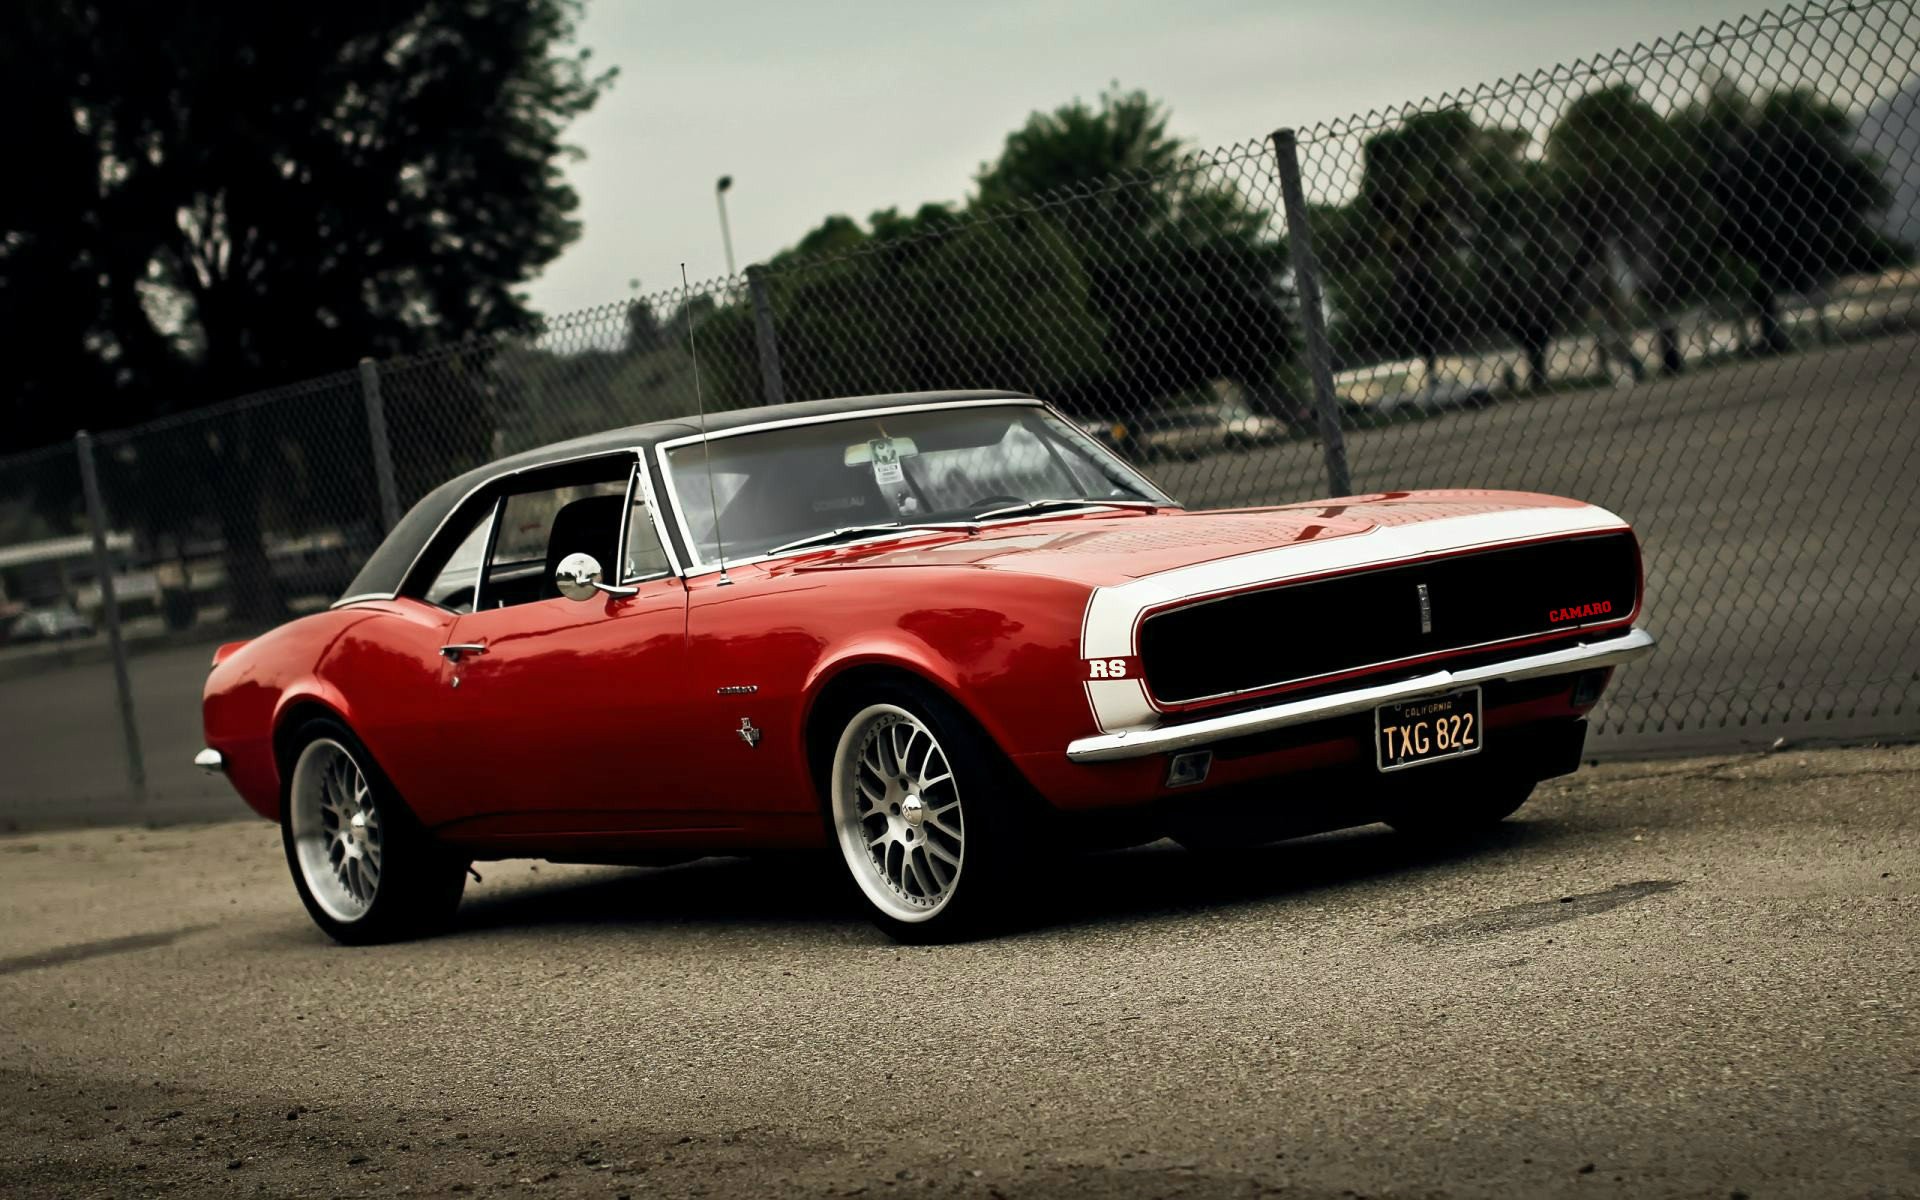 muscle Cars, Chevrolet, Camaro, Red Cars Wallpaper